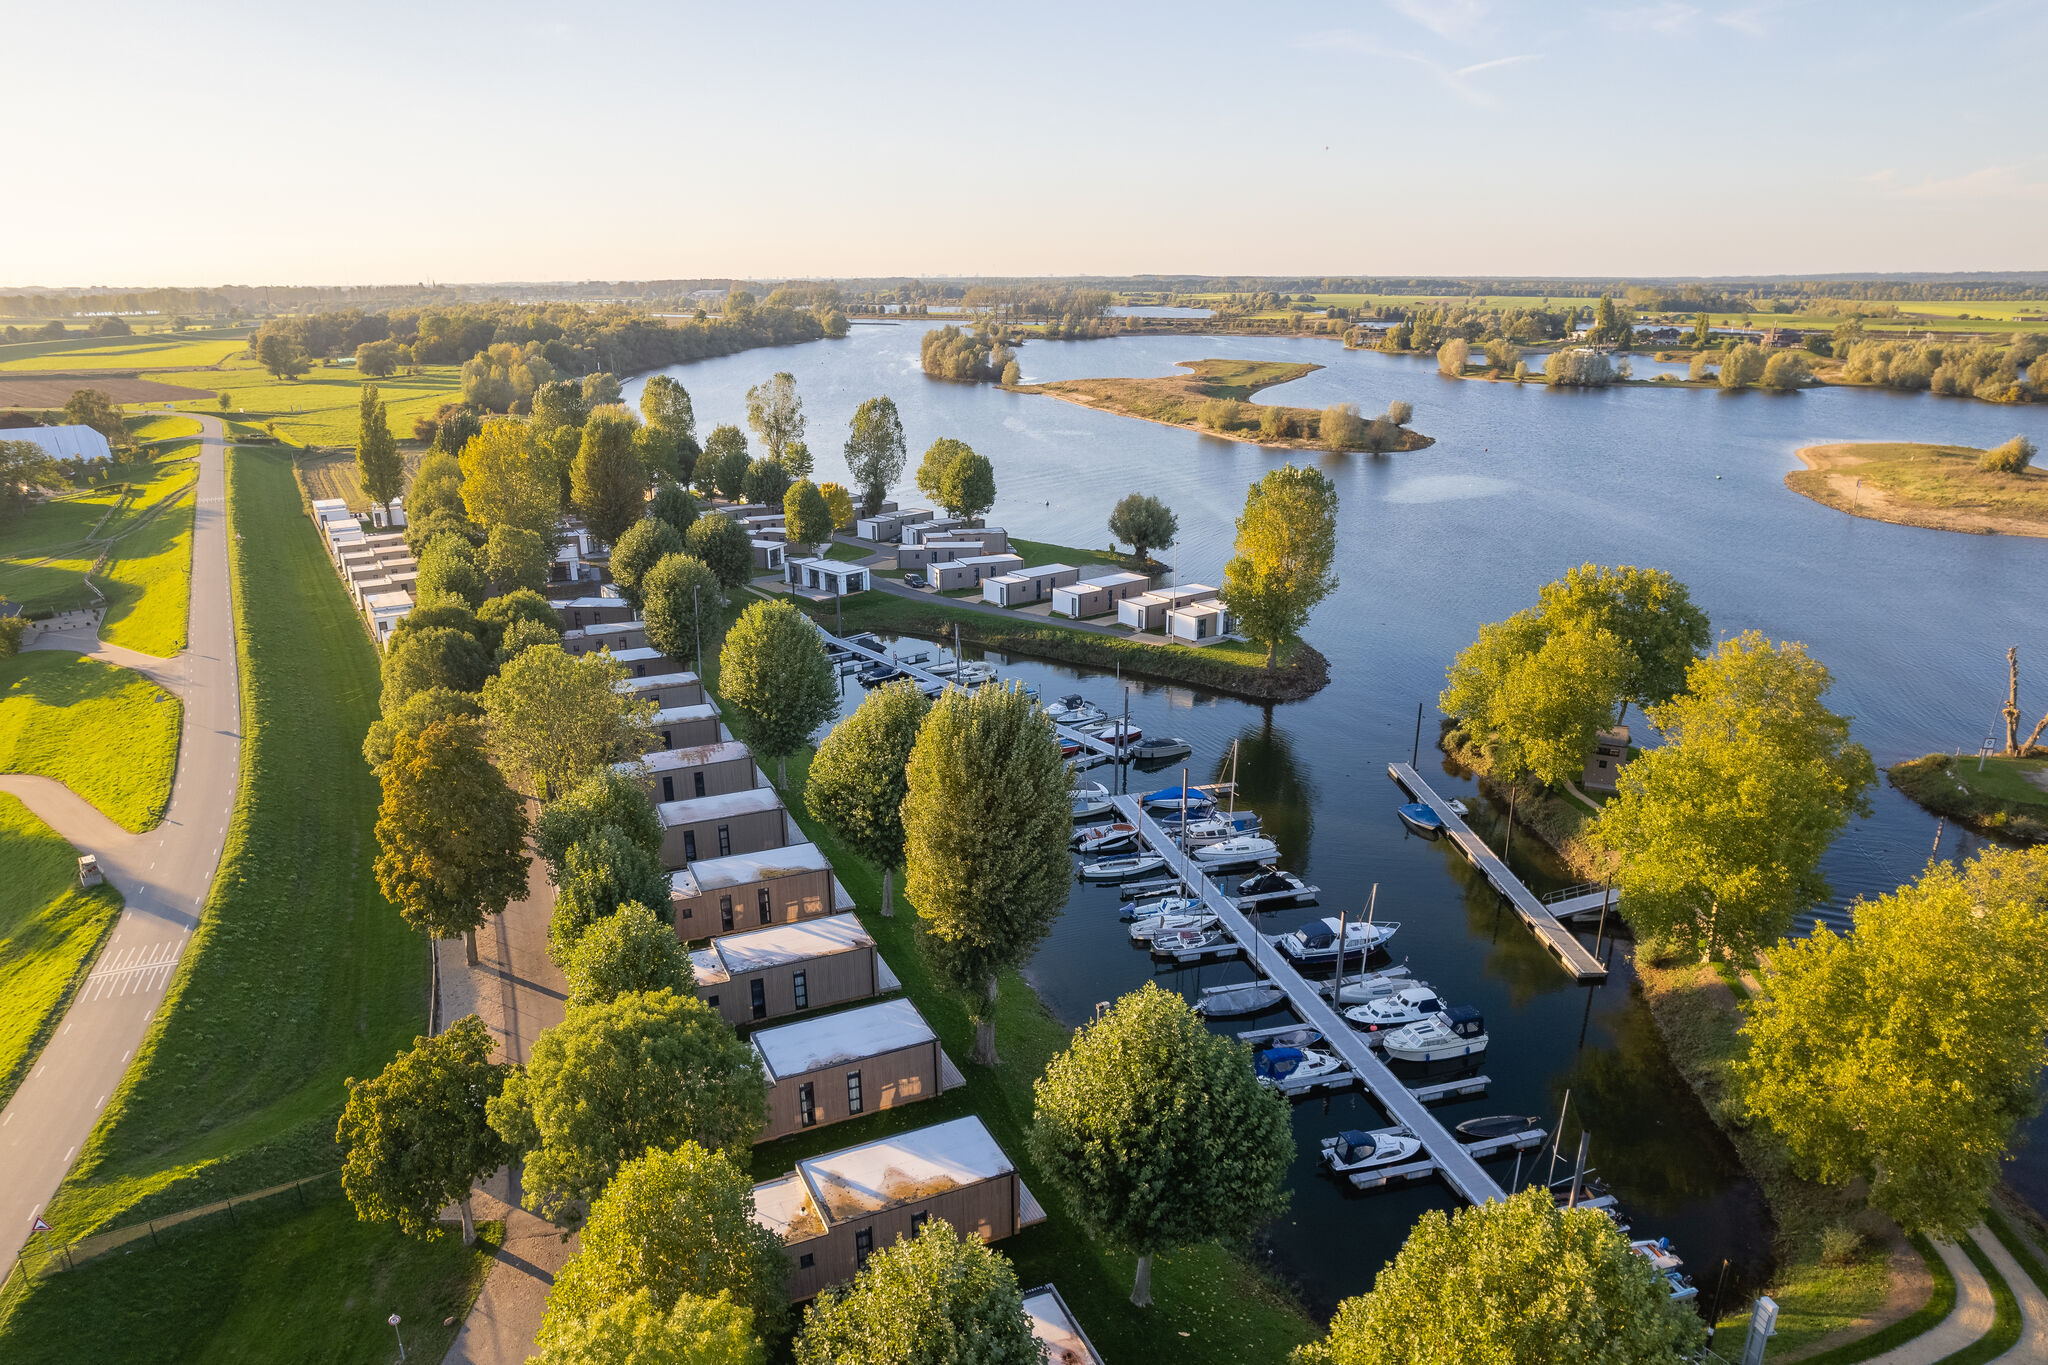 Luxury holiday home on the water, located in a holiday park in the Betuwe